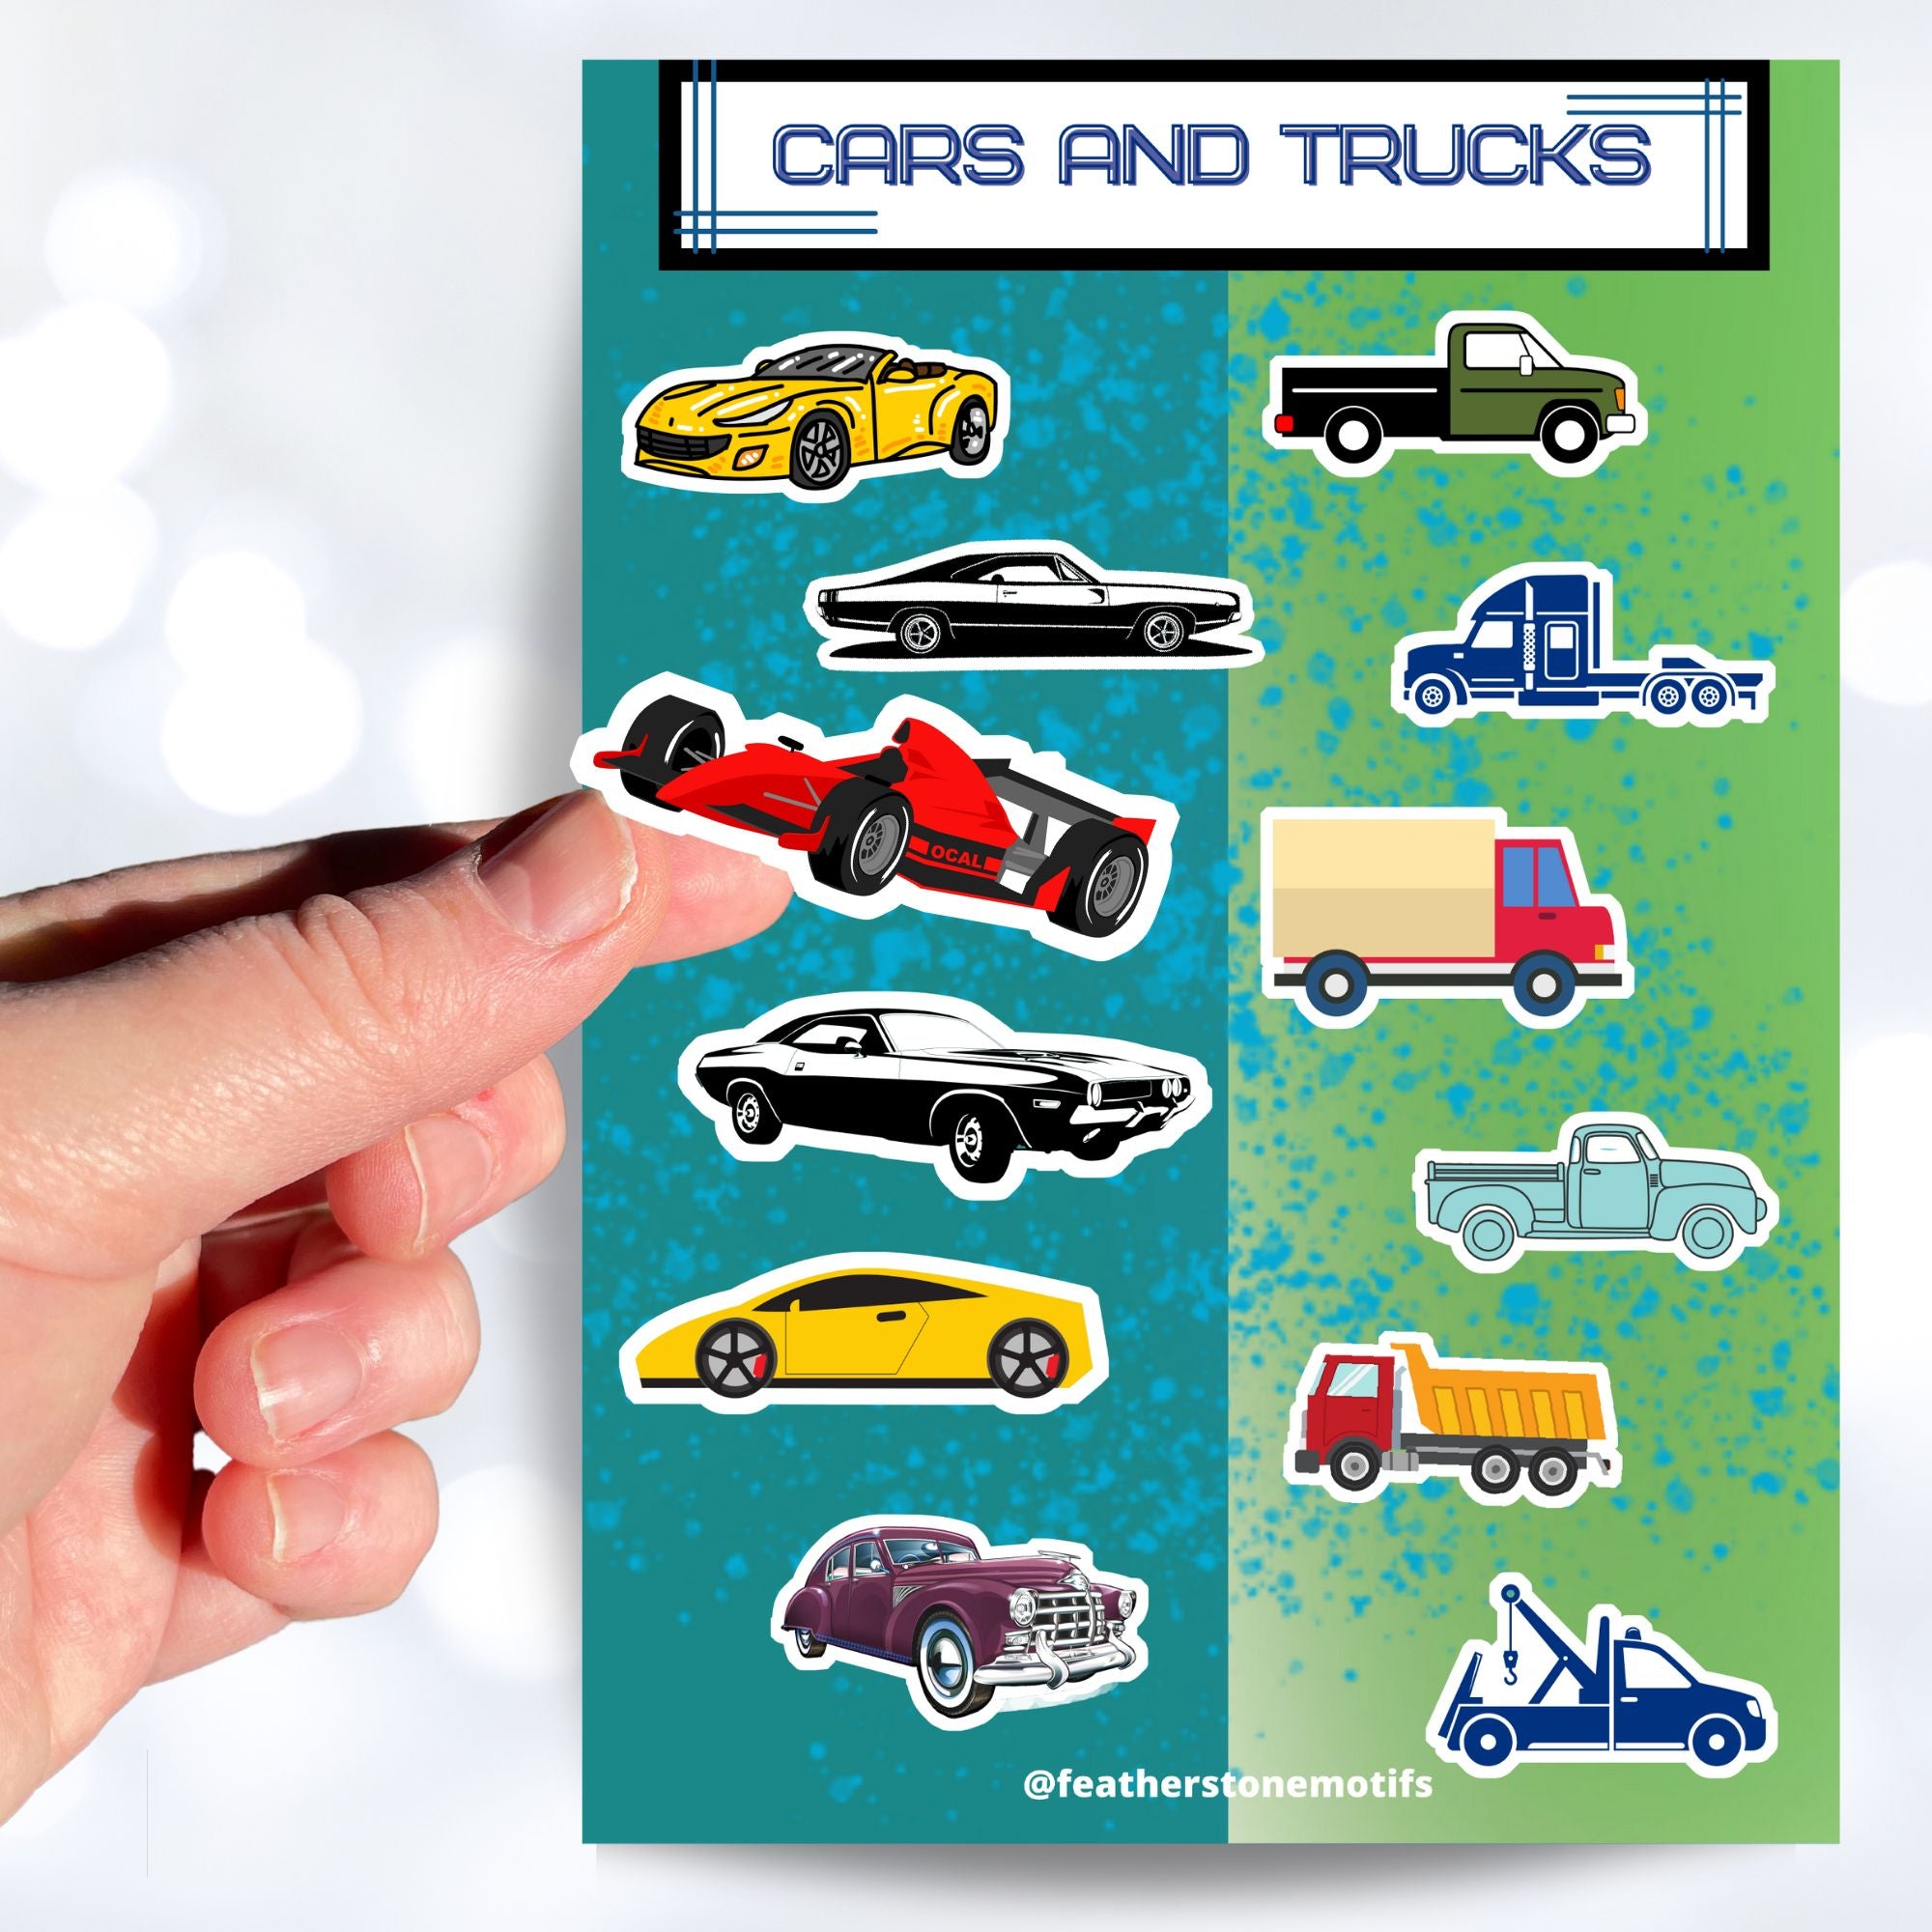 This sticker sheet has a collection of car and truck stickers; perfect for kids and adults who like their four wheel friends! This sheet has six different car stickers and six different truck stickers on a green and blue background. This image shows a hand holding a race car sticker over the sticker sheet.